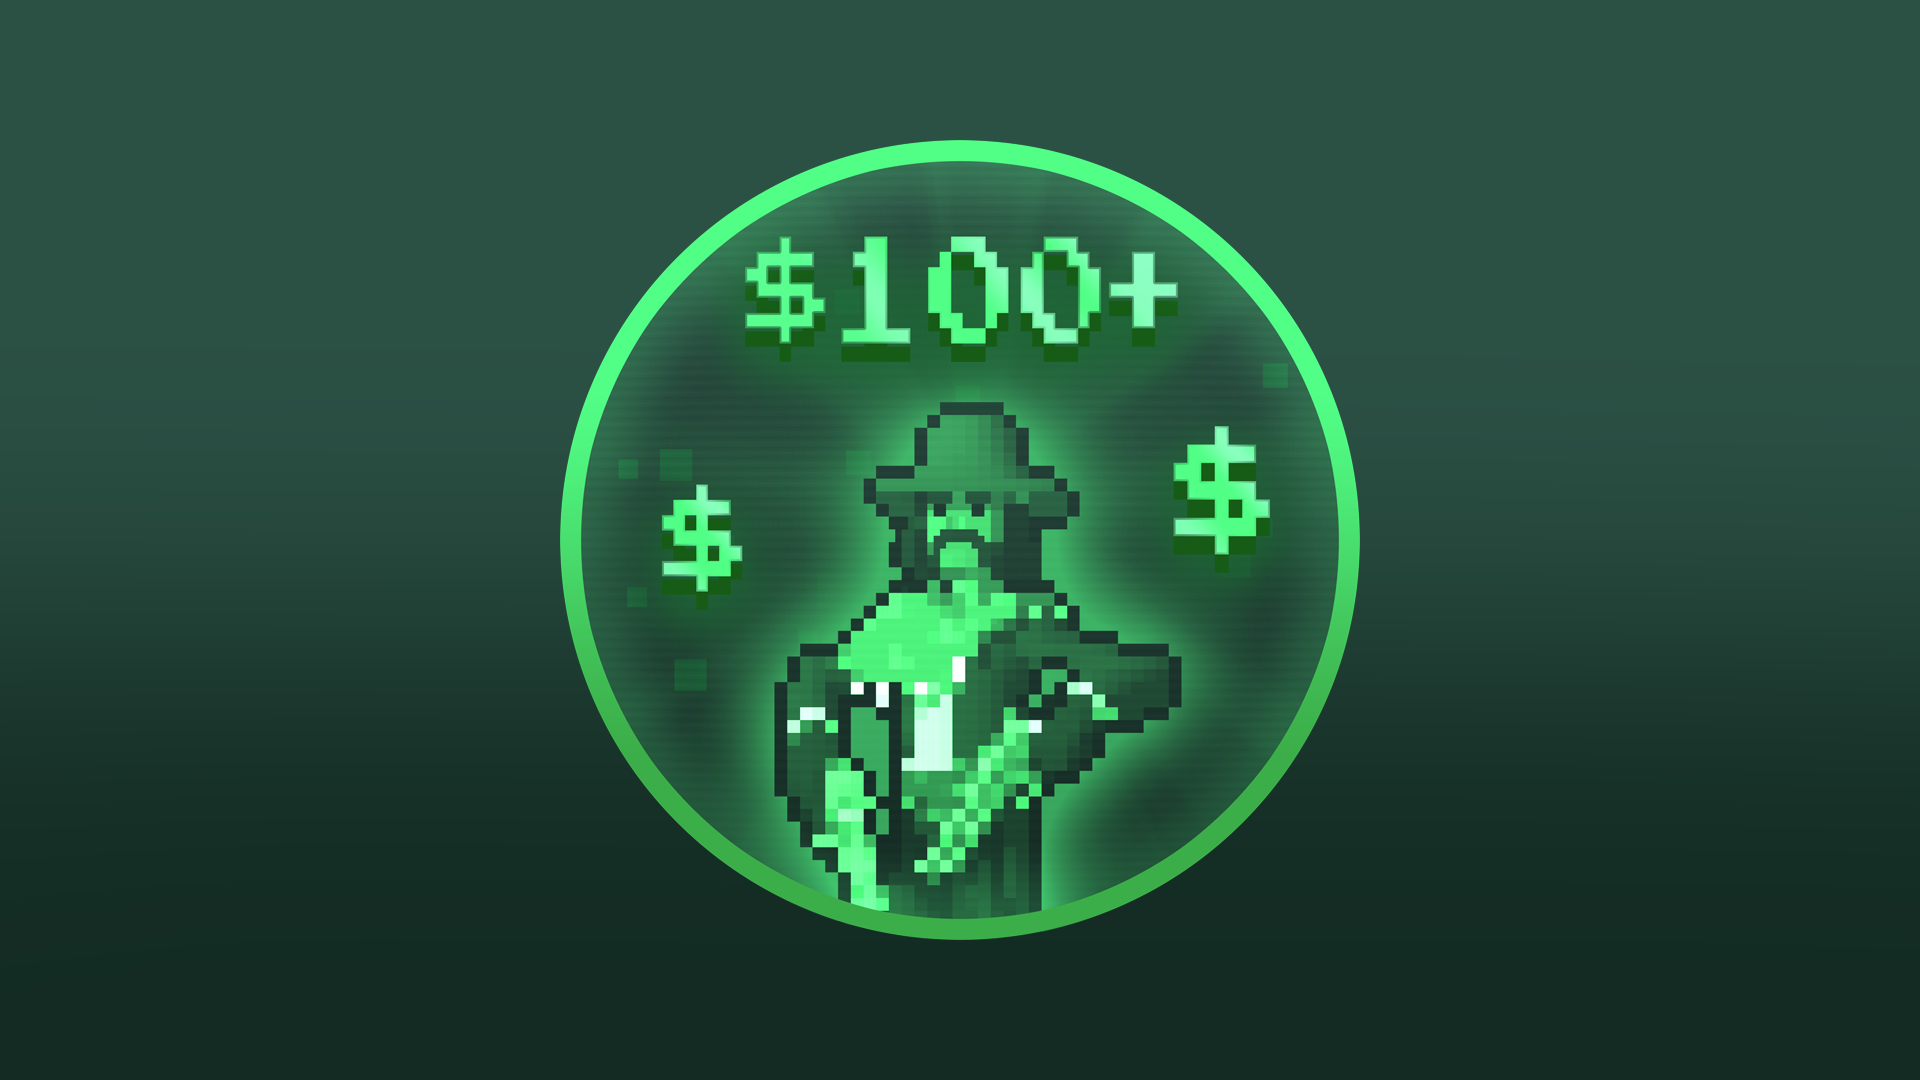 Icon for A Fistful of Greenbacks